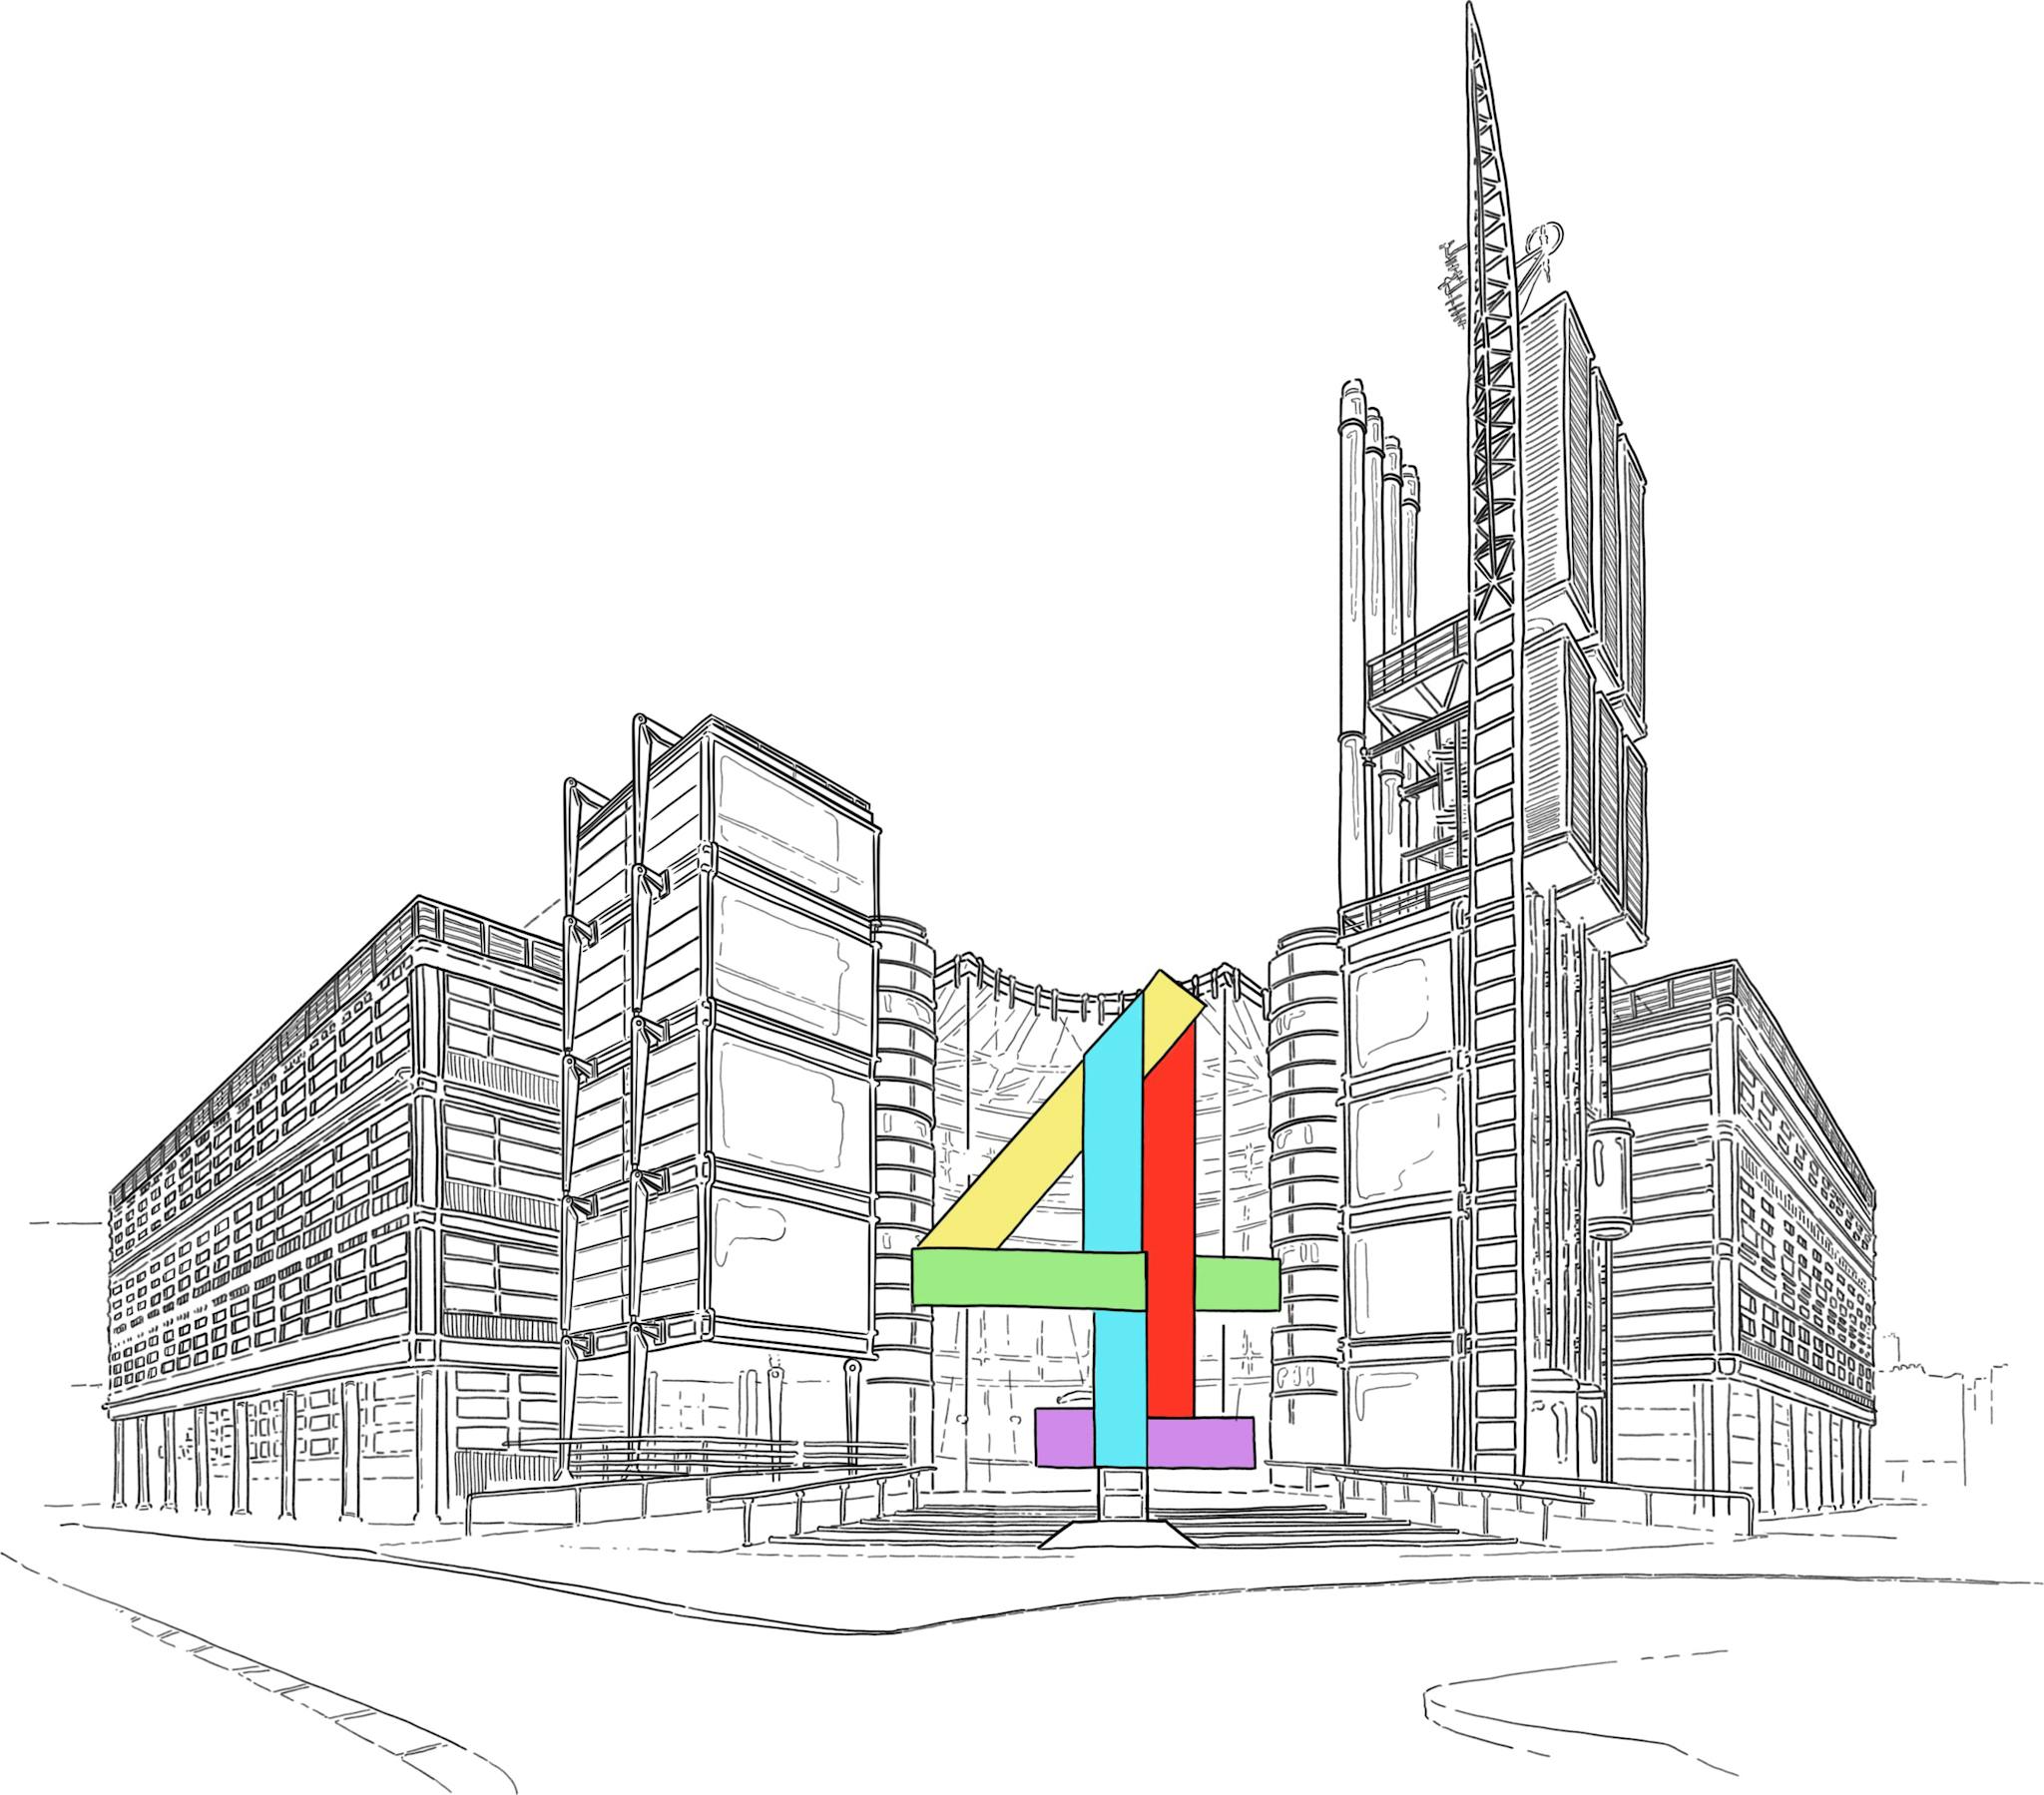 Channel4 building illustration with some color on the center